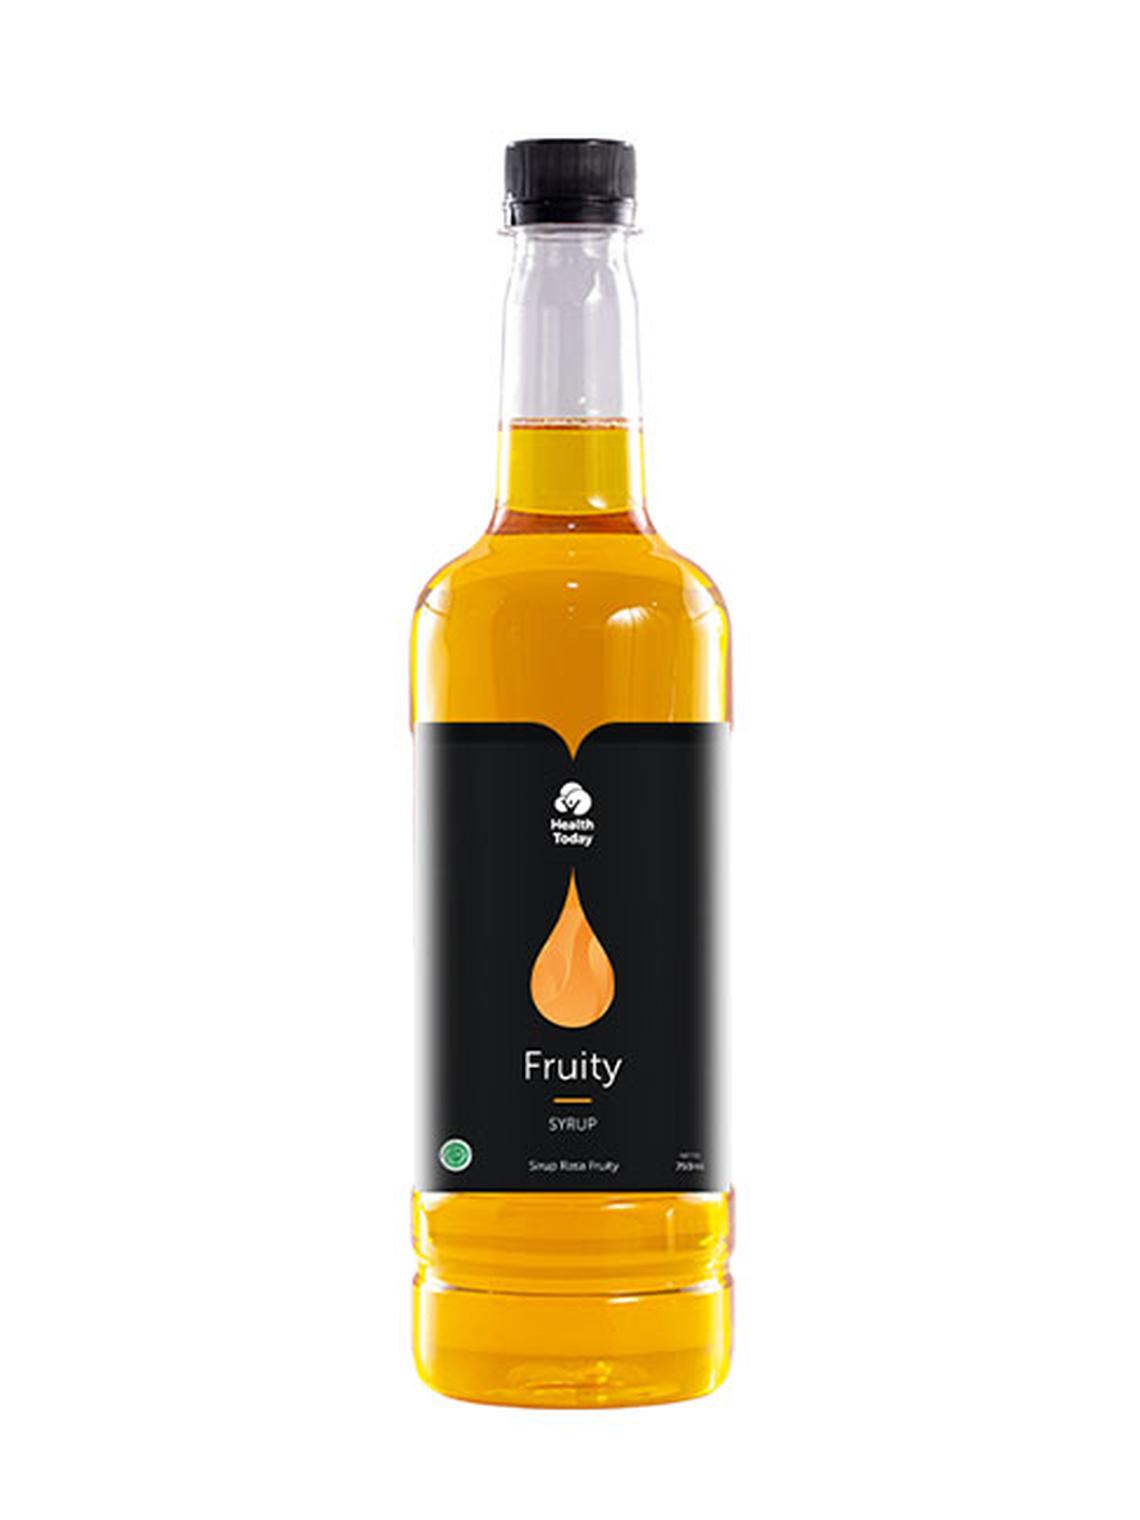 Health Today Syrup Fruity 750 ml